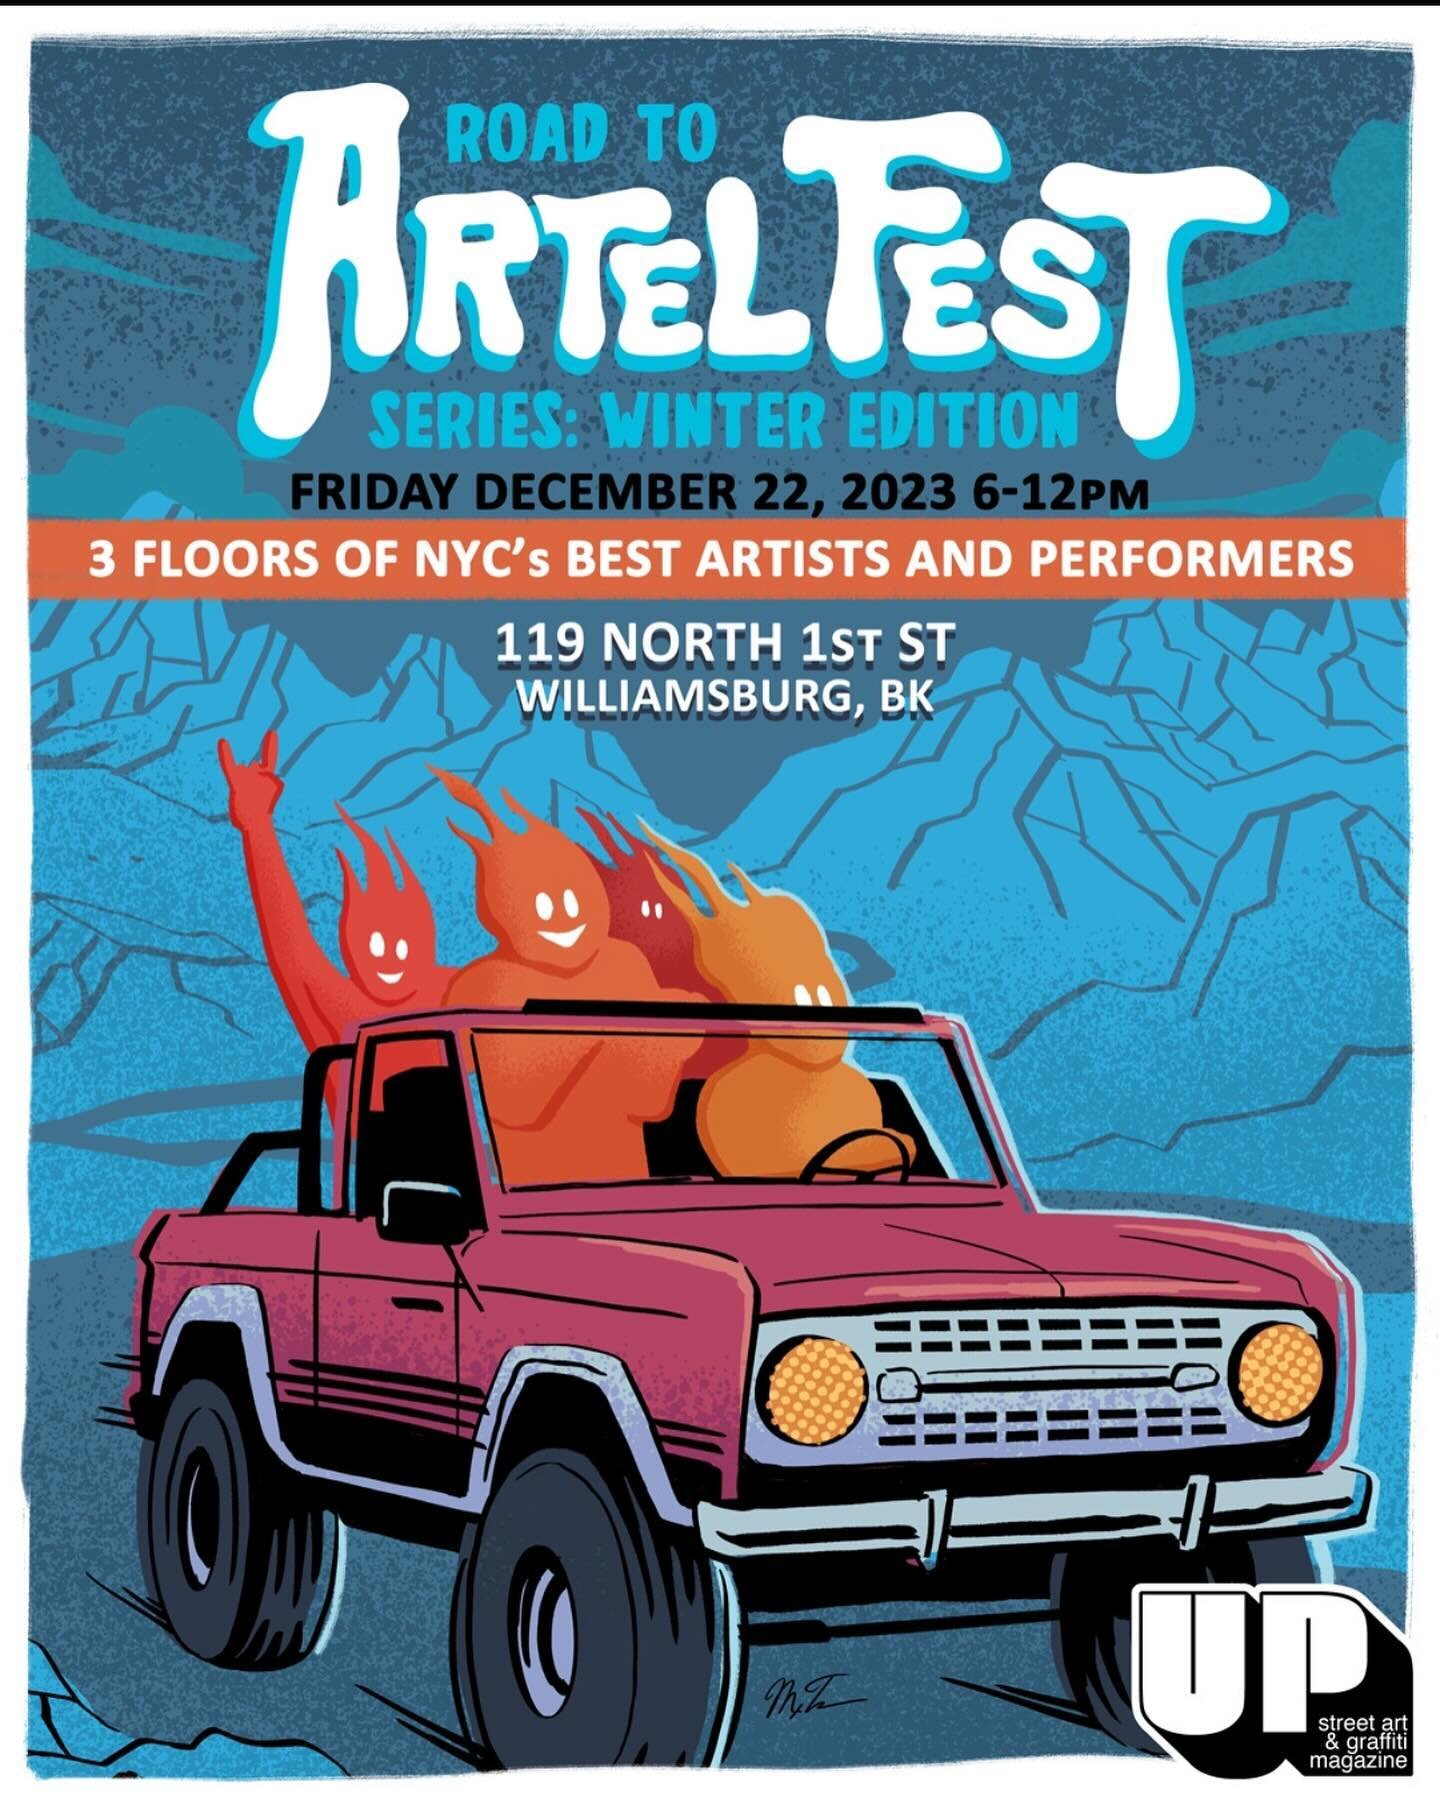 Friday December 22nd, 6-Midnight join us for Road to Artelfest: Winter Edition! ARTEL - or &ldquo;Art Everyone Loves Has curated a show with Dozens of Artist, performers,DJs and poets across 3 stories of art in Williamsburg!
9 : 119 North 1st Street,